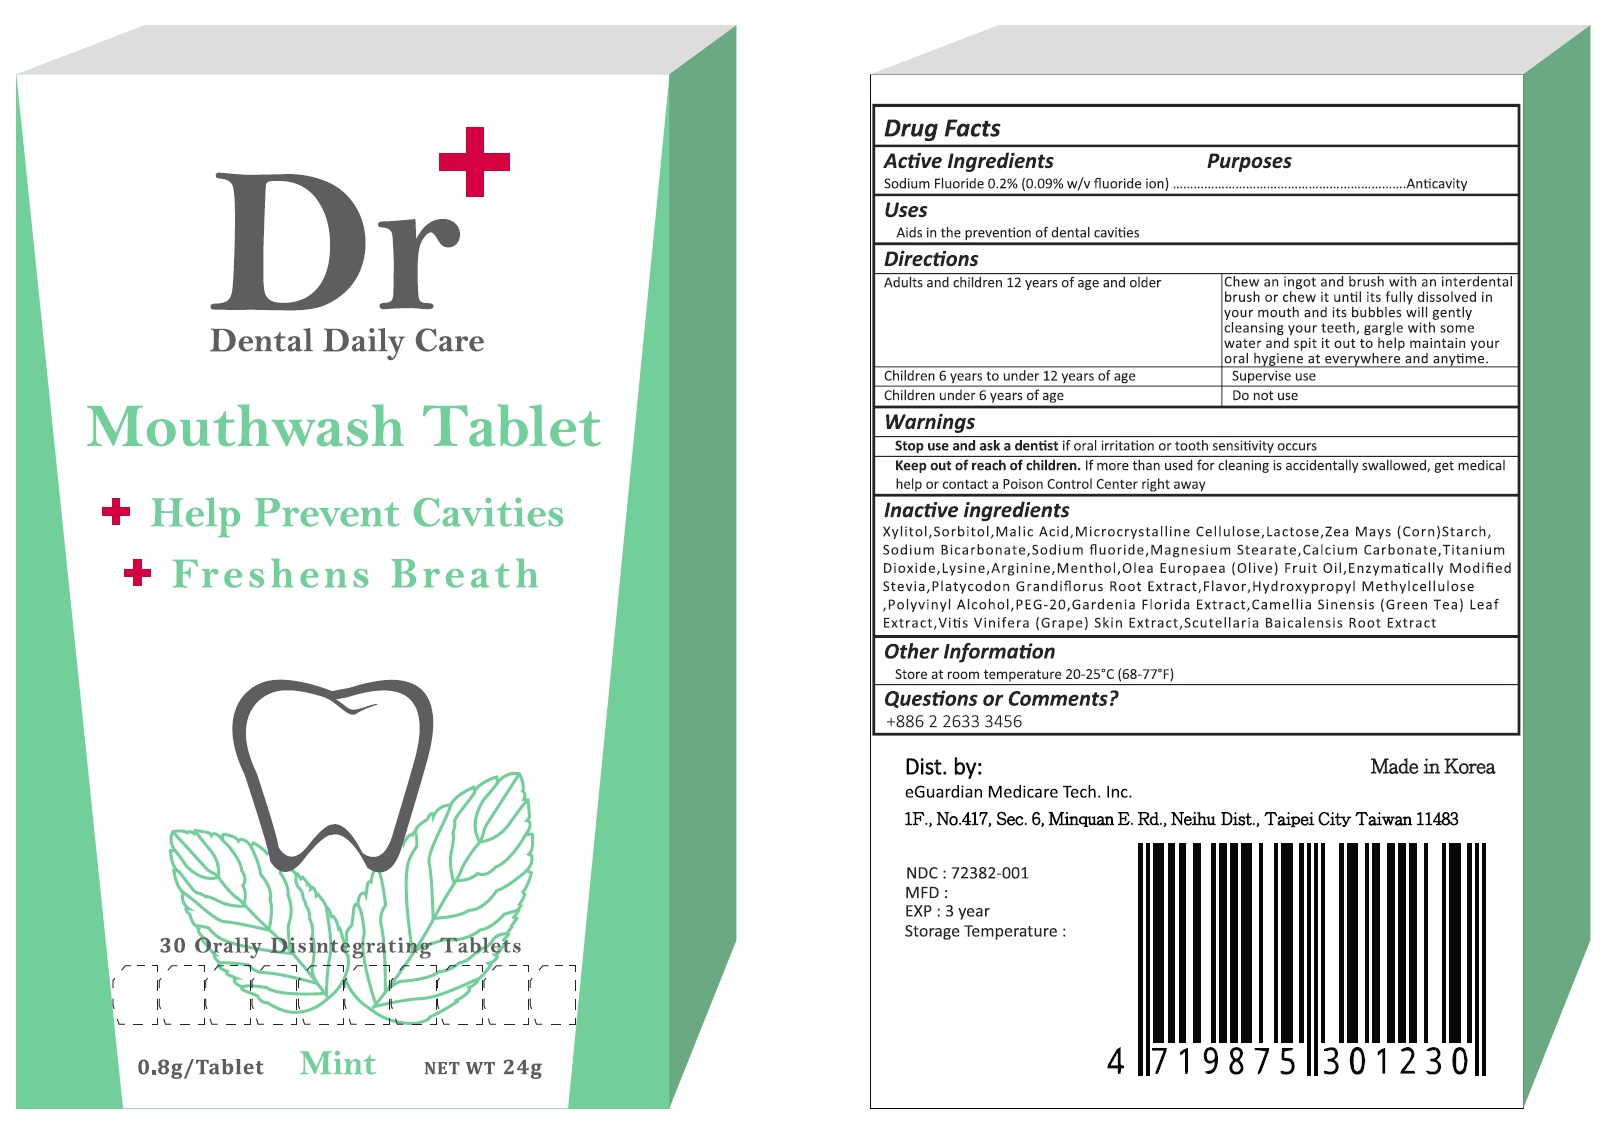 Is Dr Plus Dental Daily Care | Sodium Fluoride Tablet, Orally Disintegrating safe while breastfeeding